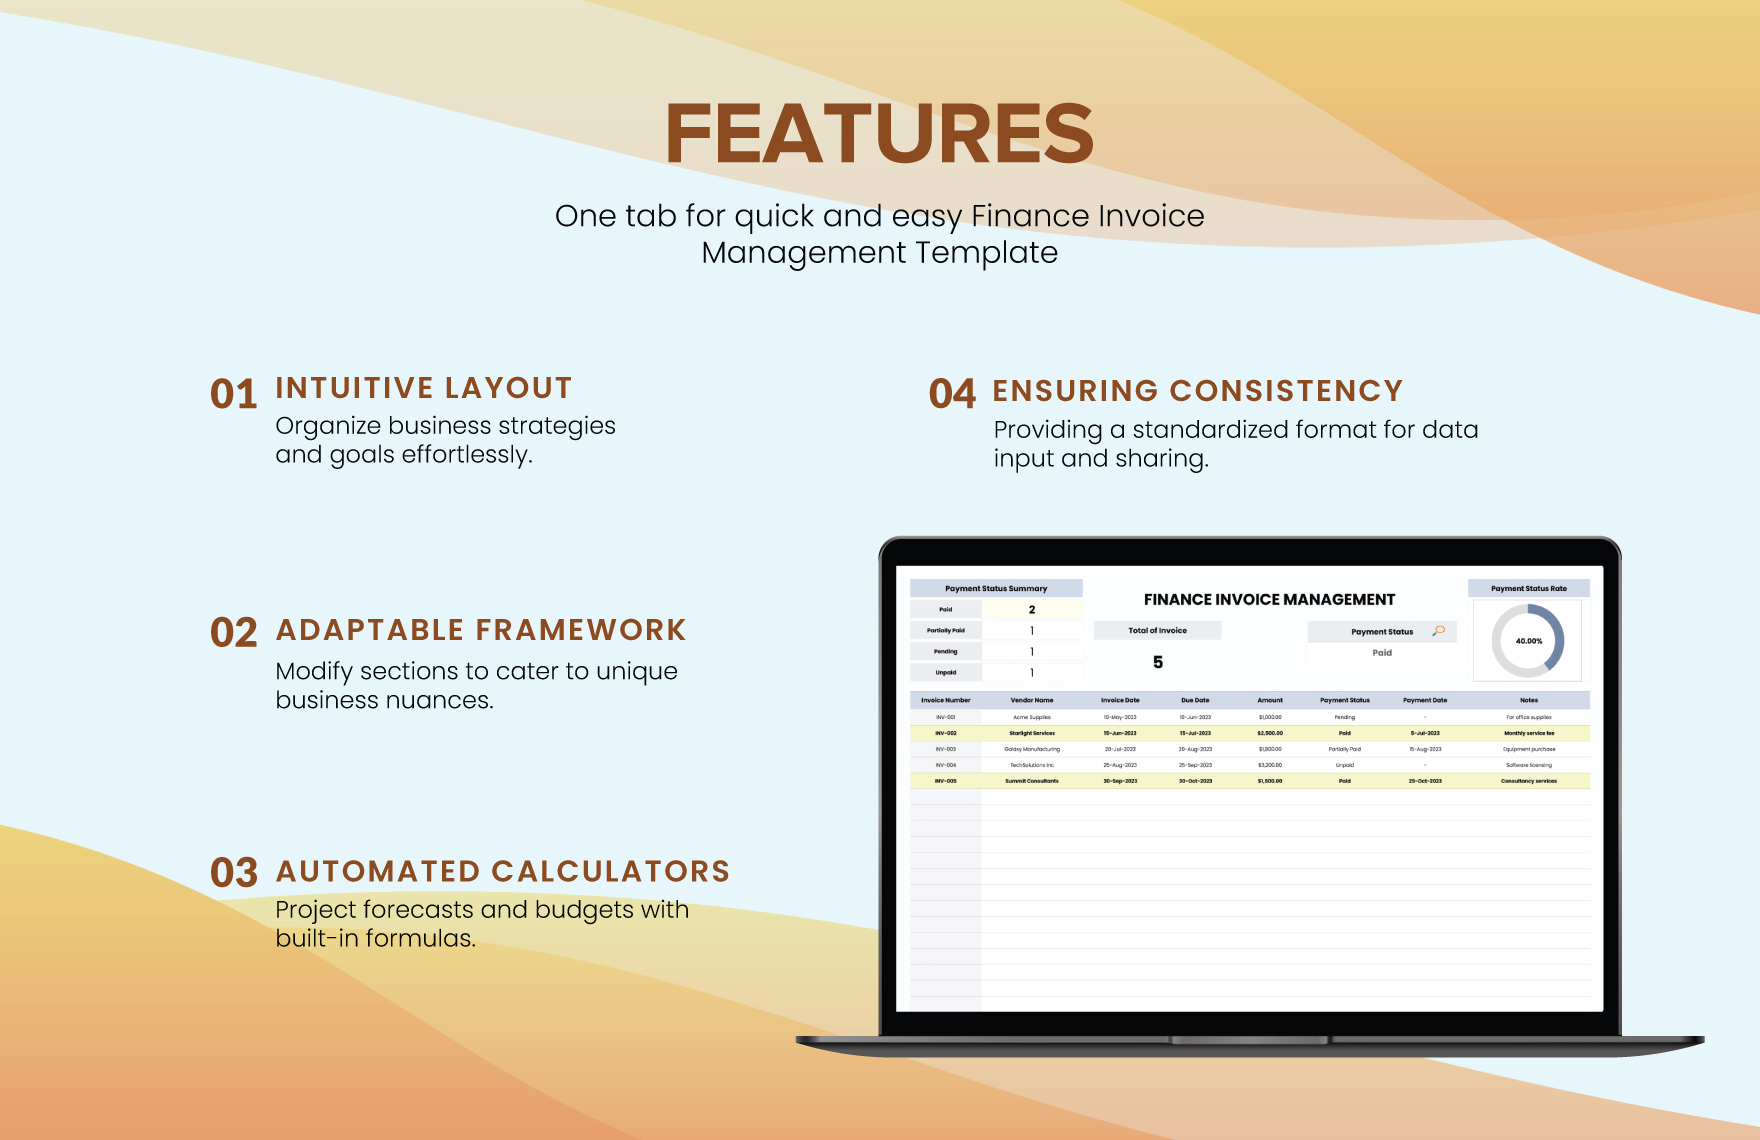 Finance Invoice Management Template